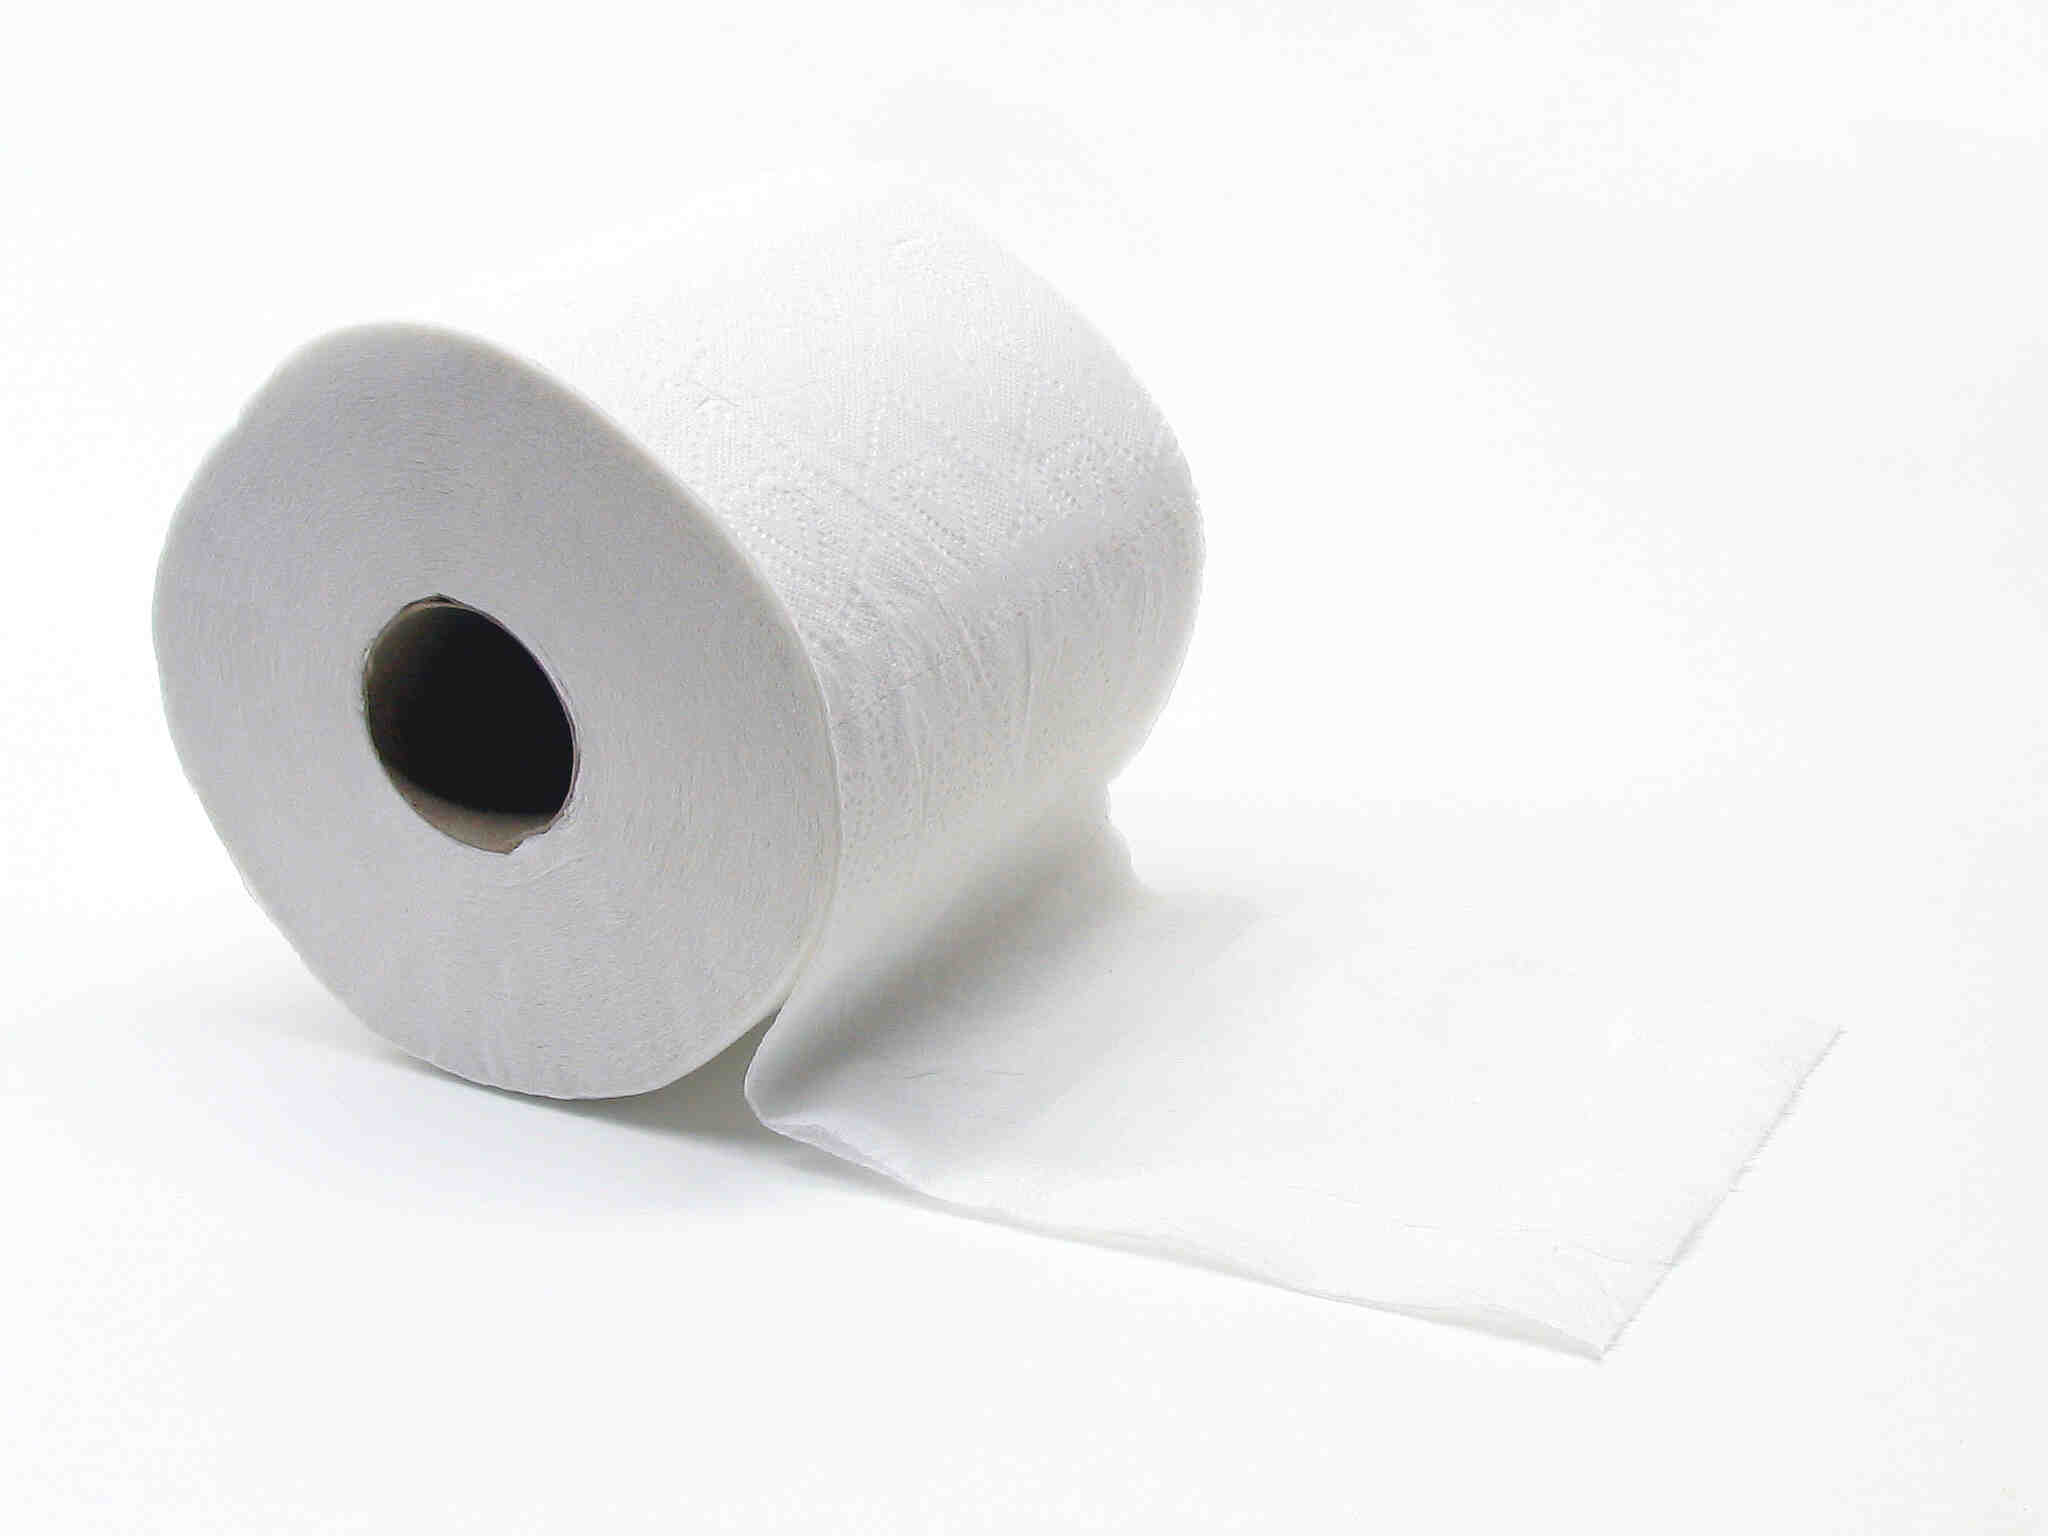 What is toilet paper called in England?